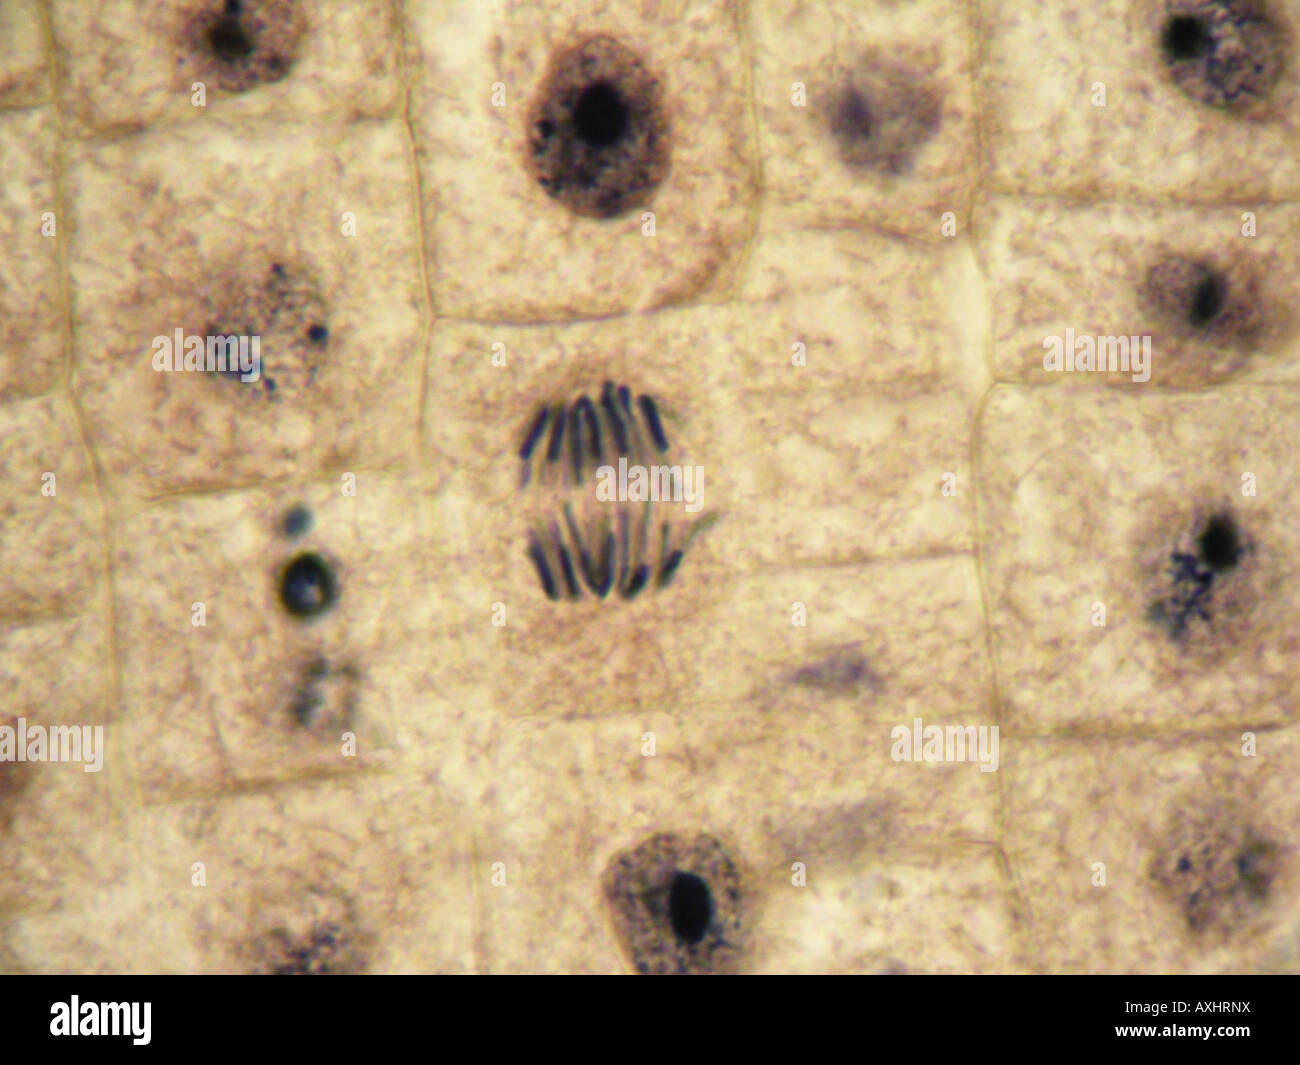 Mitosis (Anaphase) in onion tissue at 1000x under optical microscope. inmersion oil objetive 100x Stock Photo